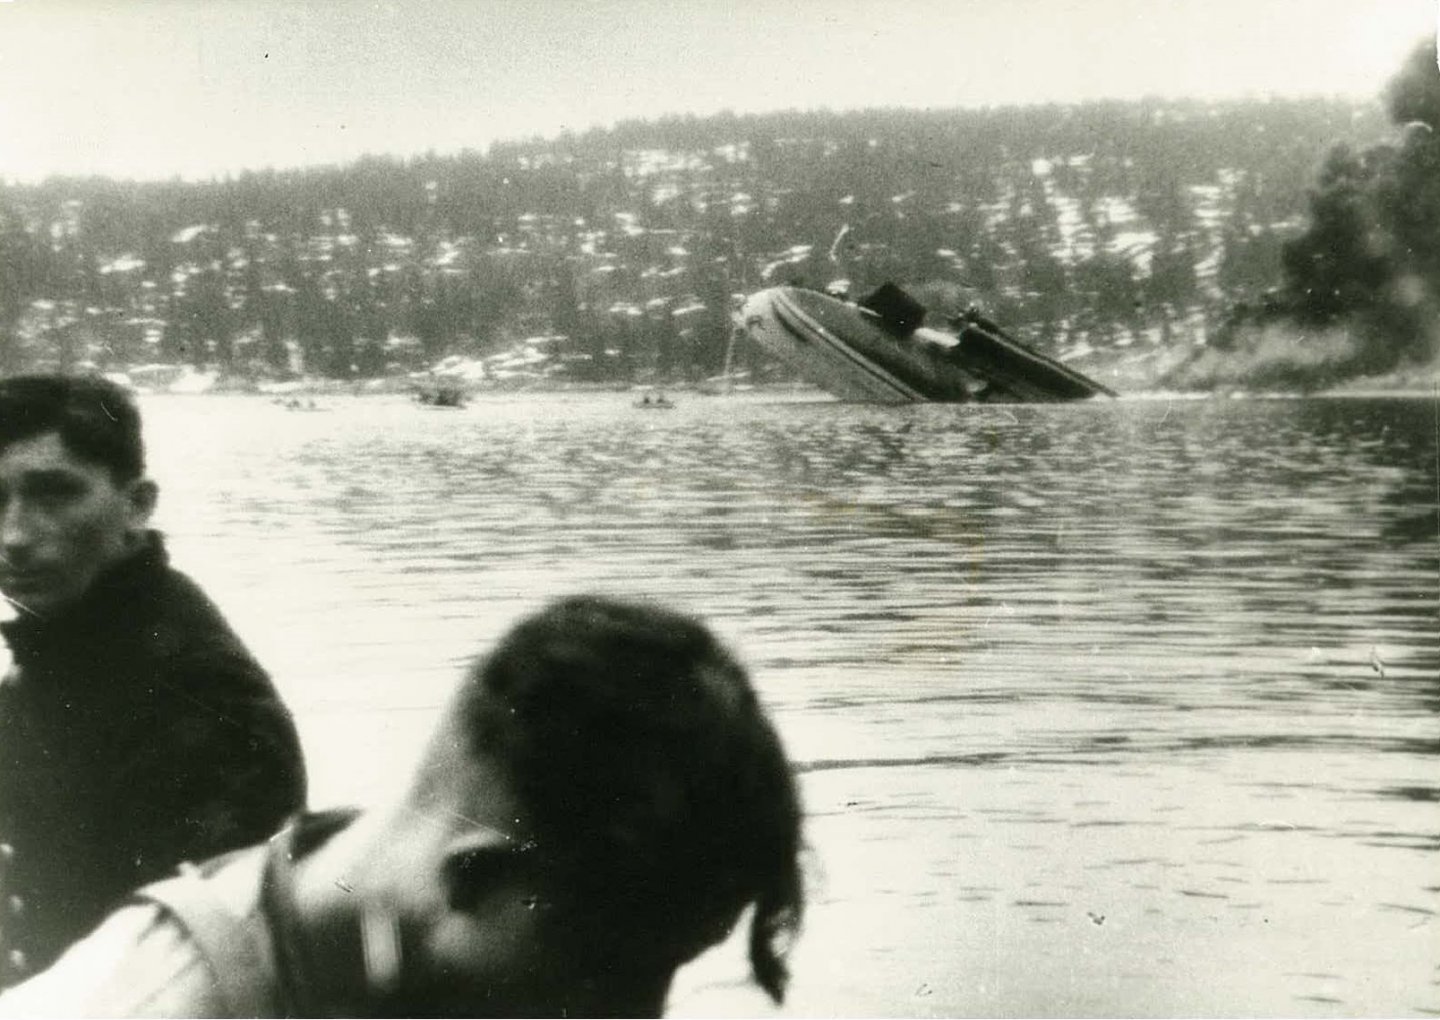 German_soldiers_and_Bl%C3%BCcher_sinking.jpg